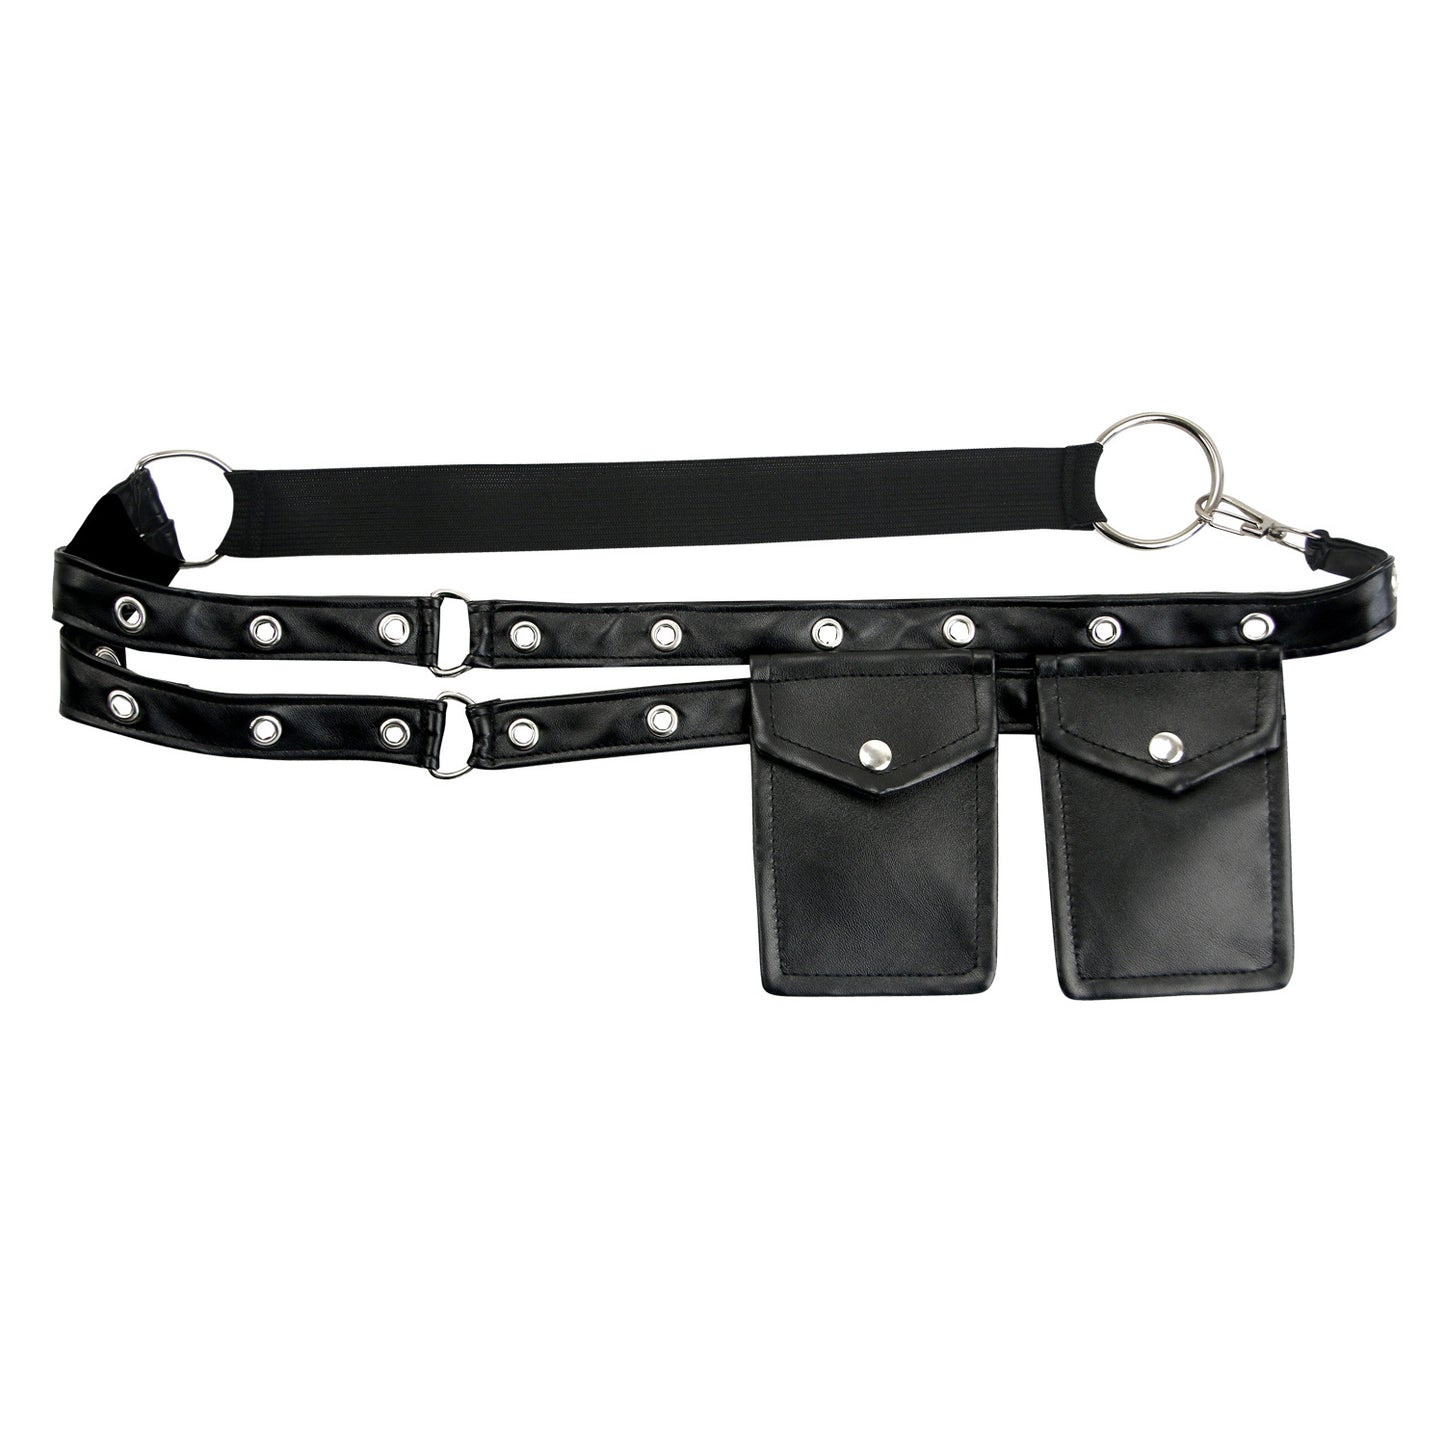 A Maramalive™ Waist Pocket Belt Corset Steampunk Costume Accessory with two metal buckles.